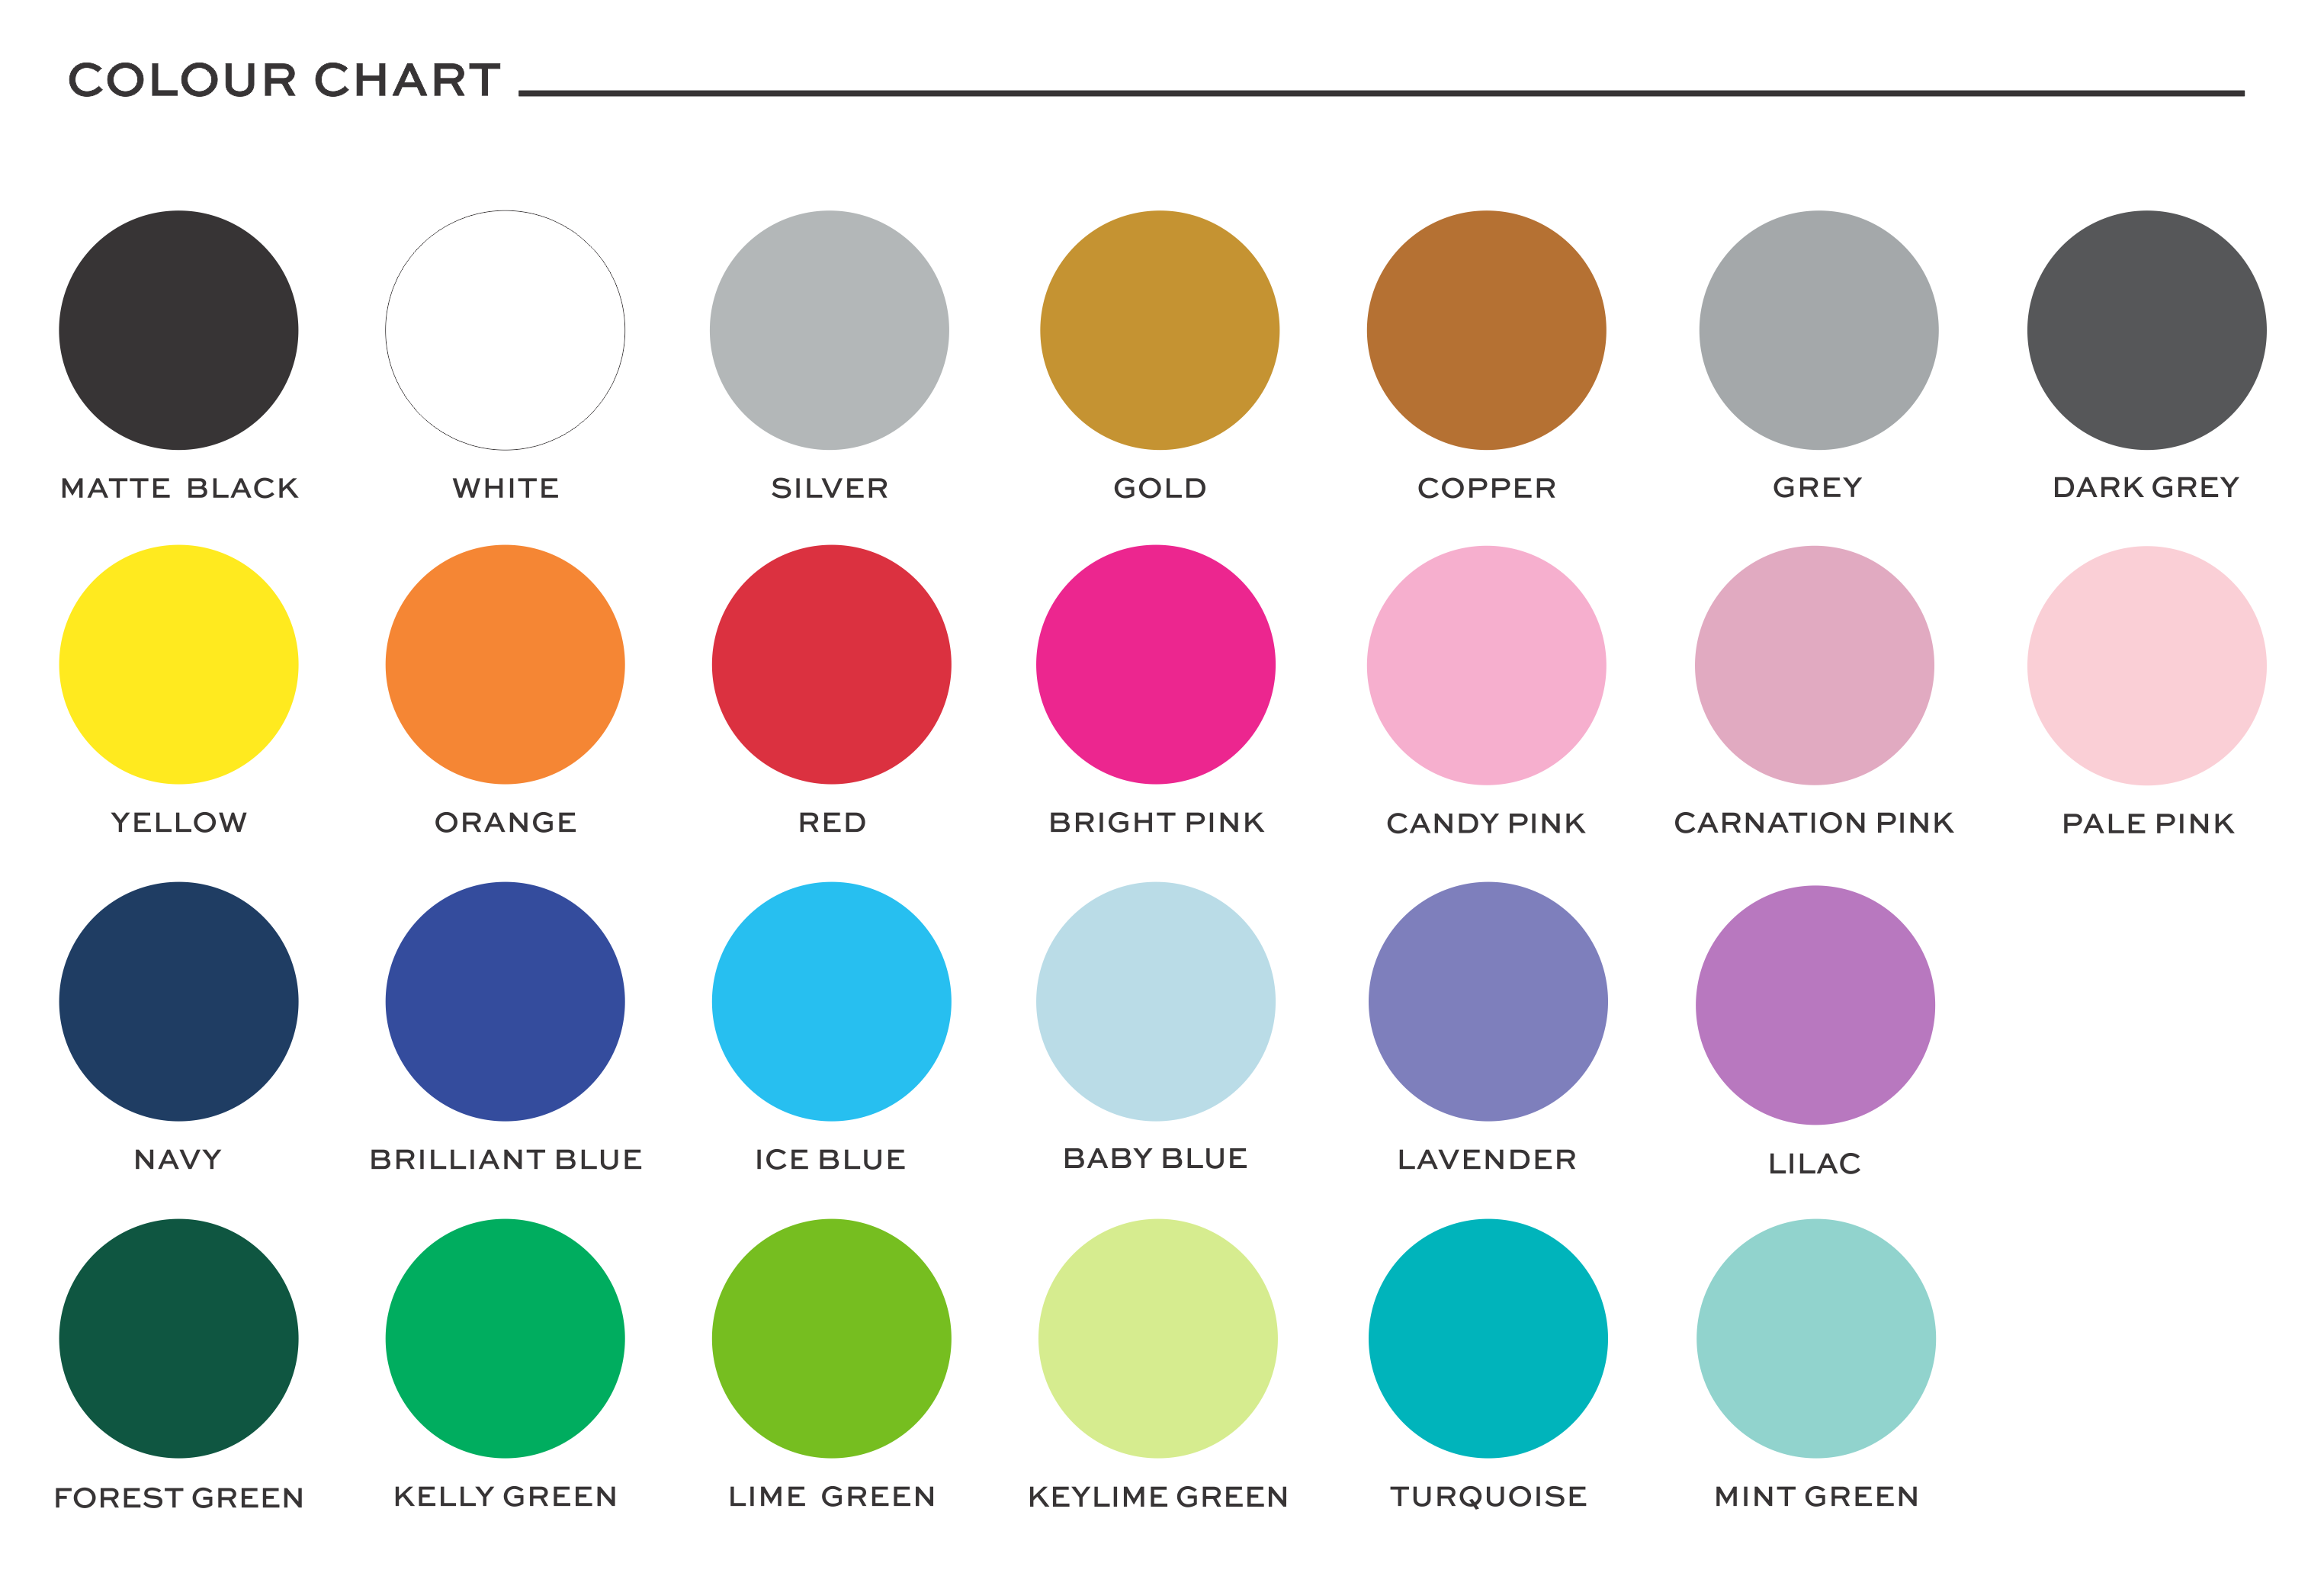 Colour Chart From The Wall Sticker Company